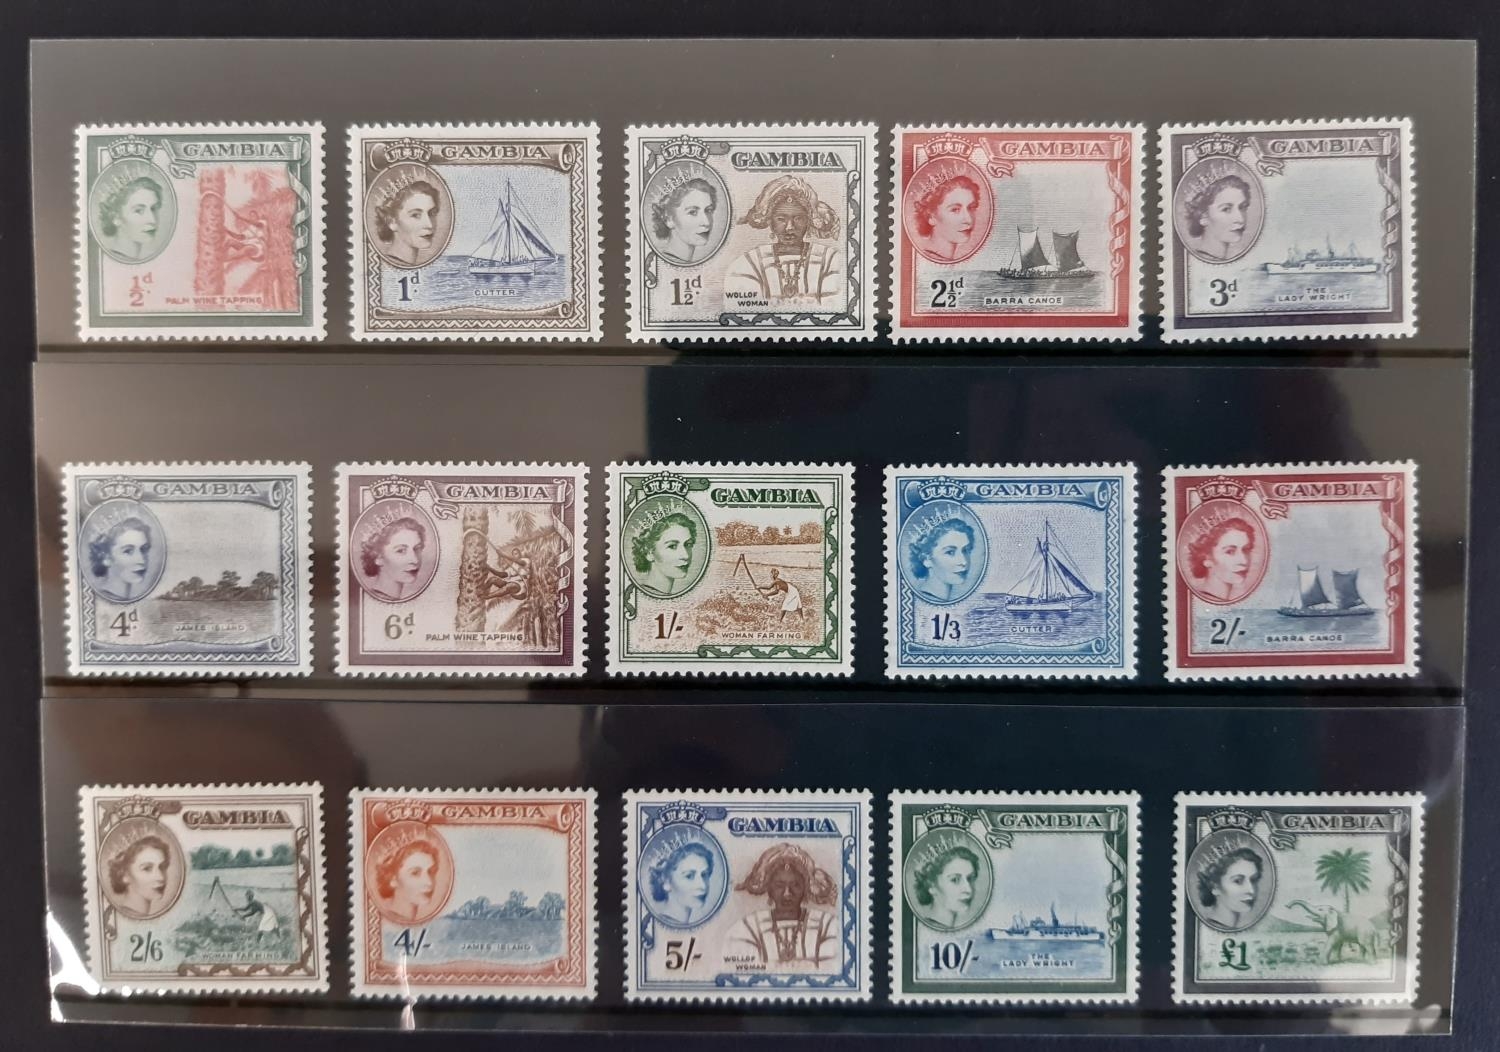 Gambia 1953 QEII definitive set SG 171-185 VLMM to 1/3s then UM high values SG cat £110.